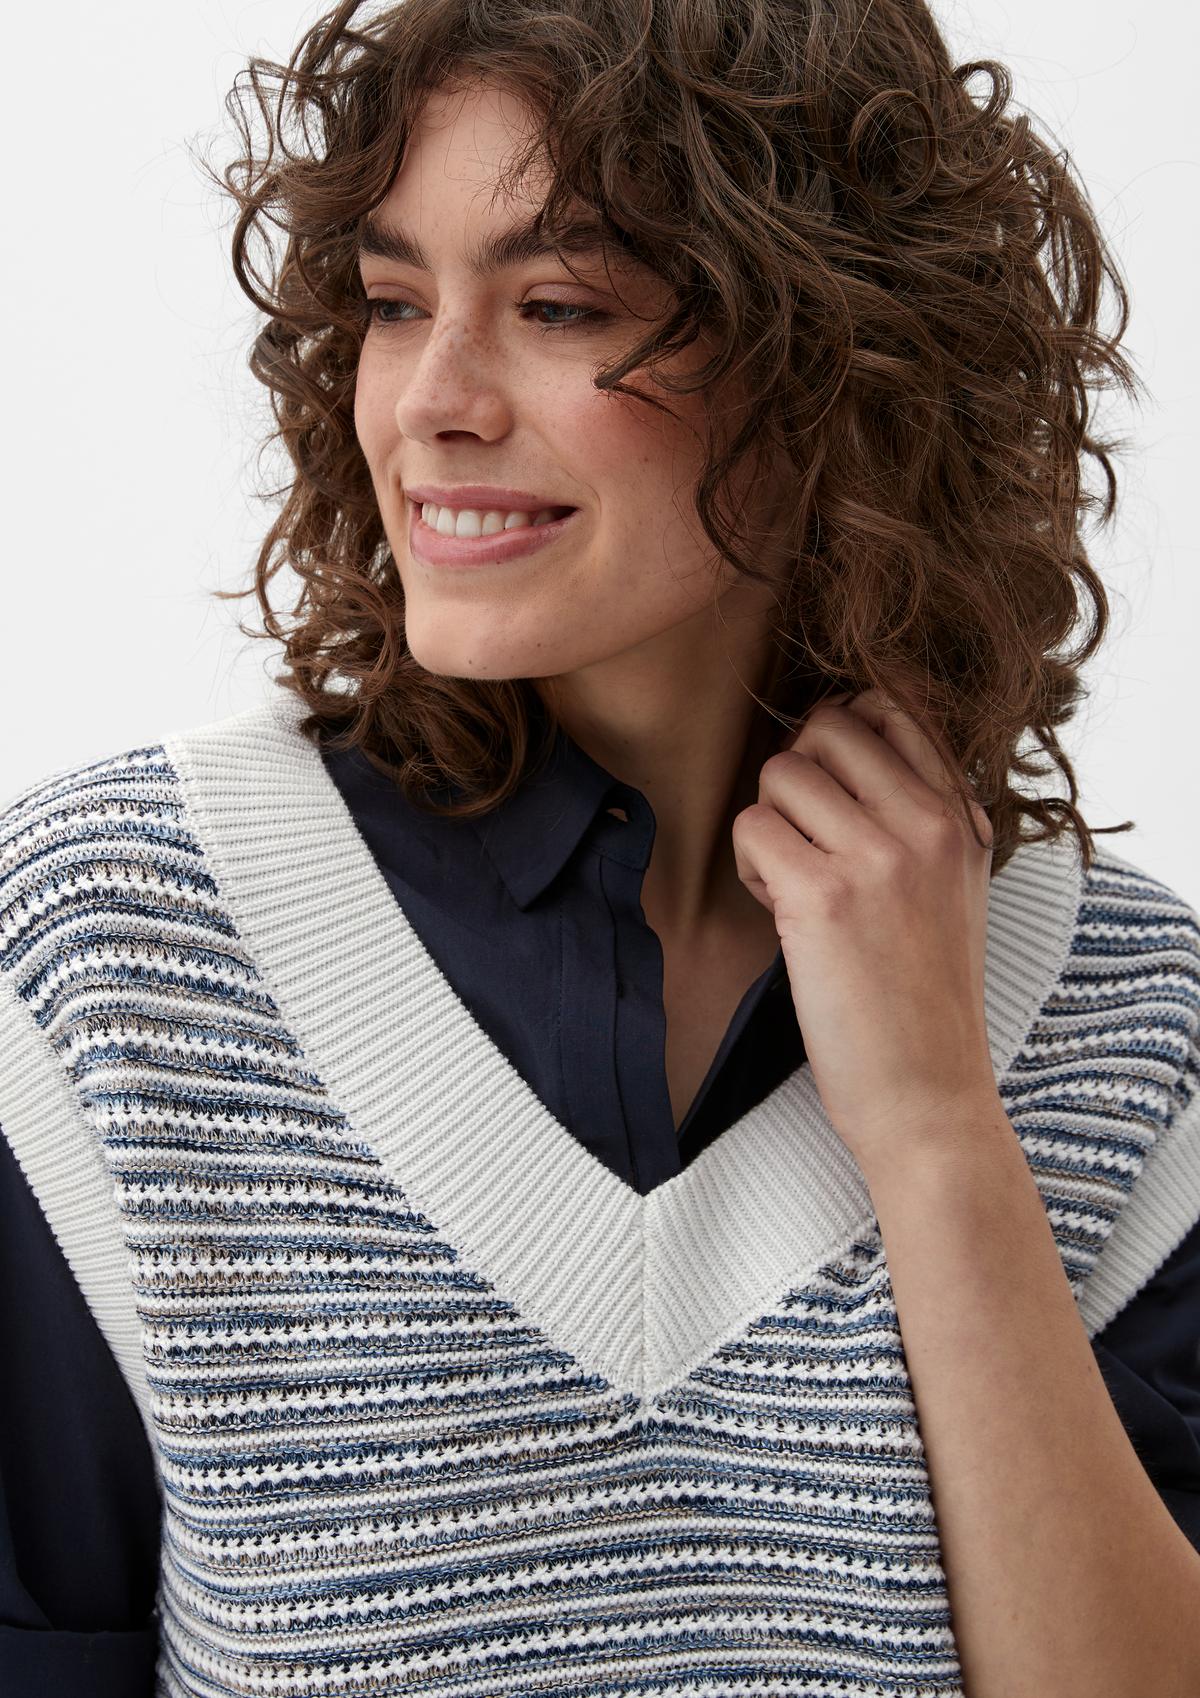 s.Oliver Knitted sleeveless knitted jumper with a textured pattern